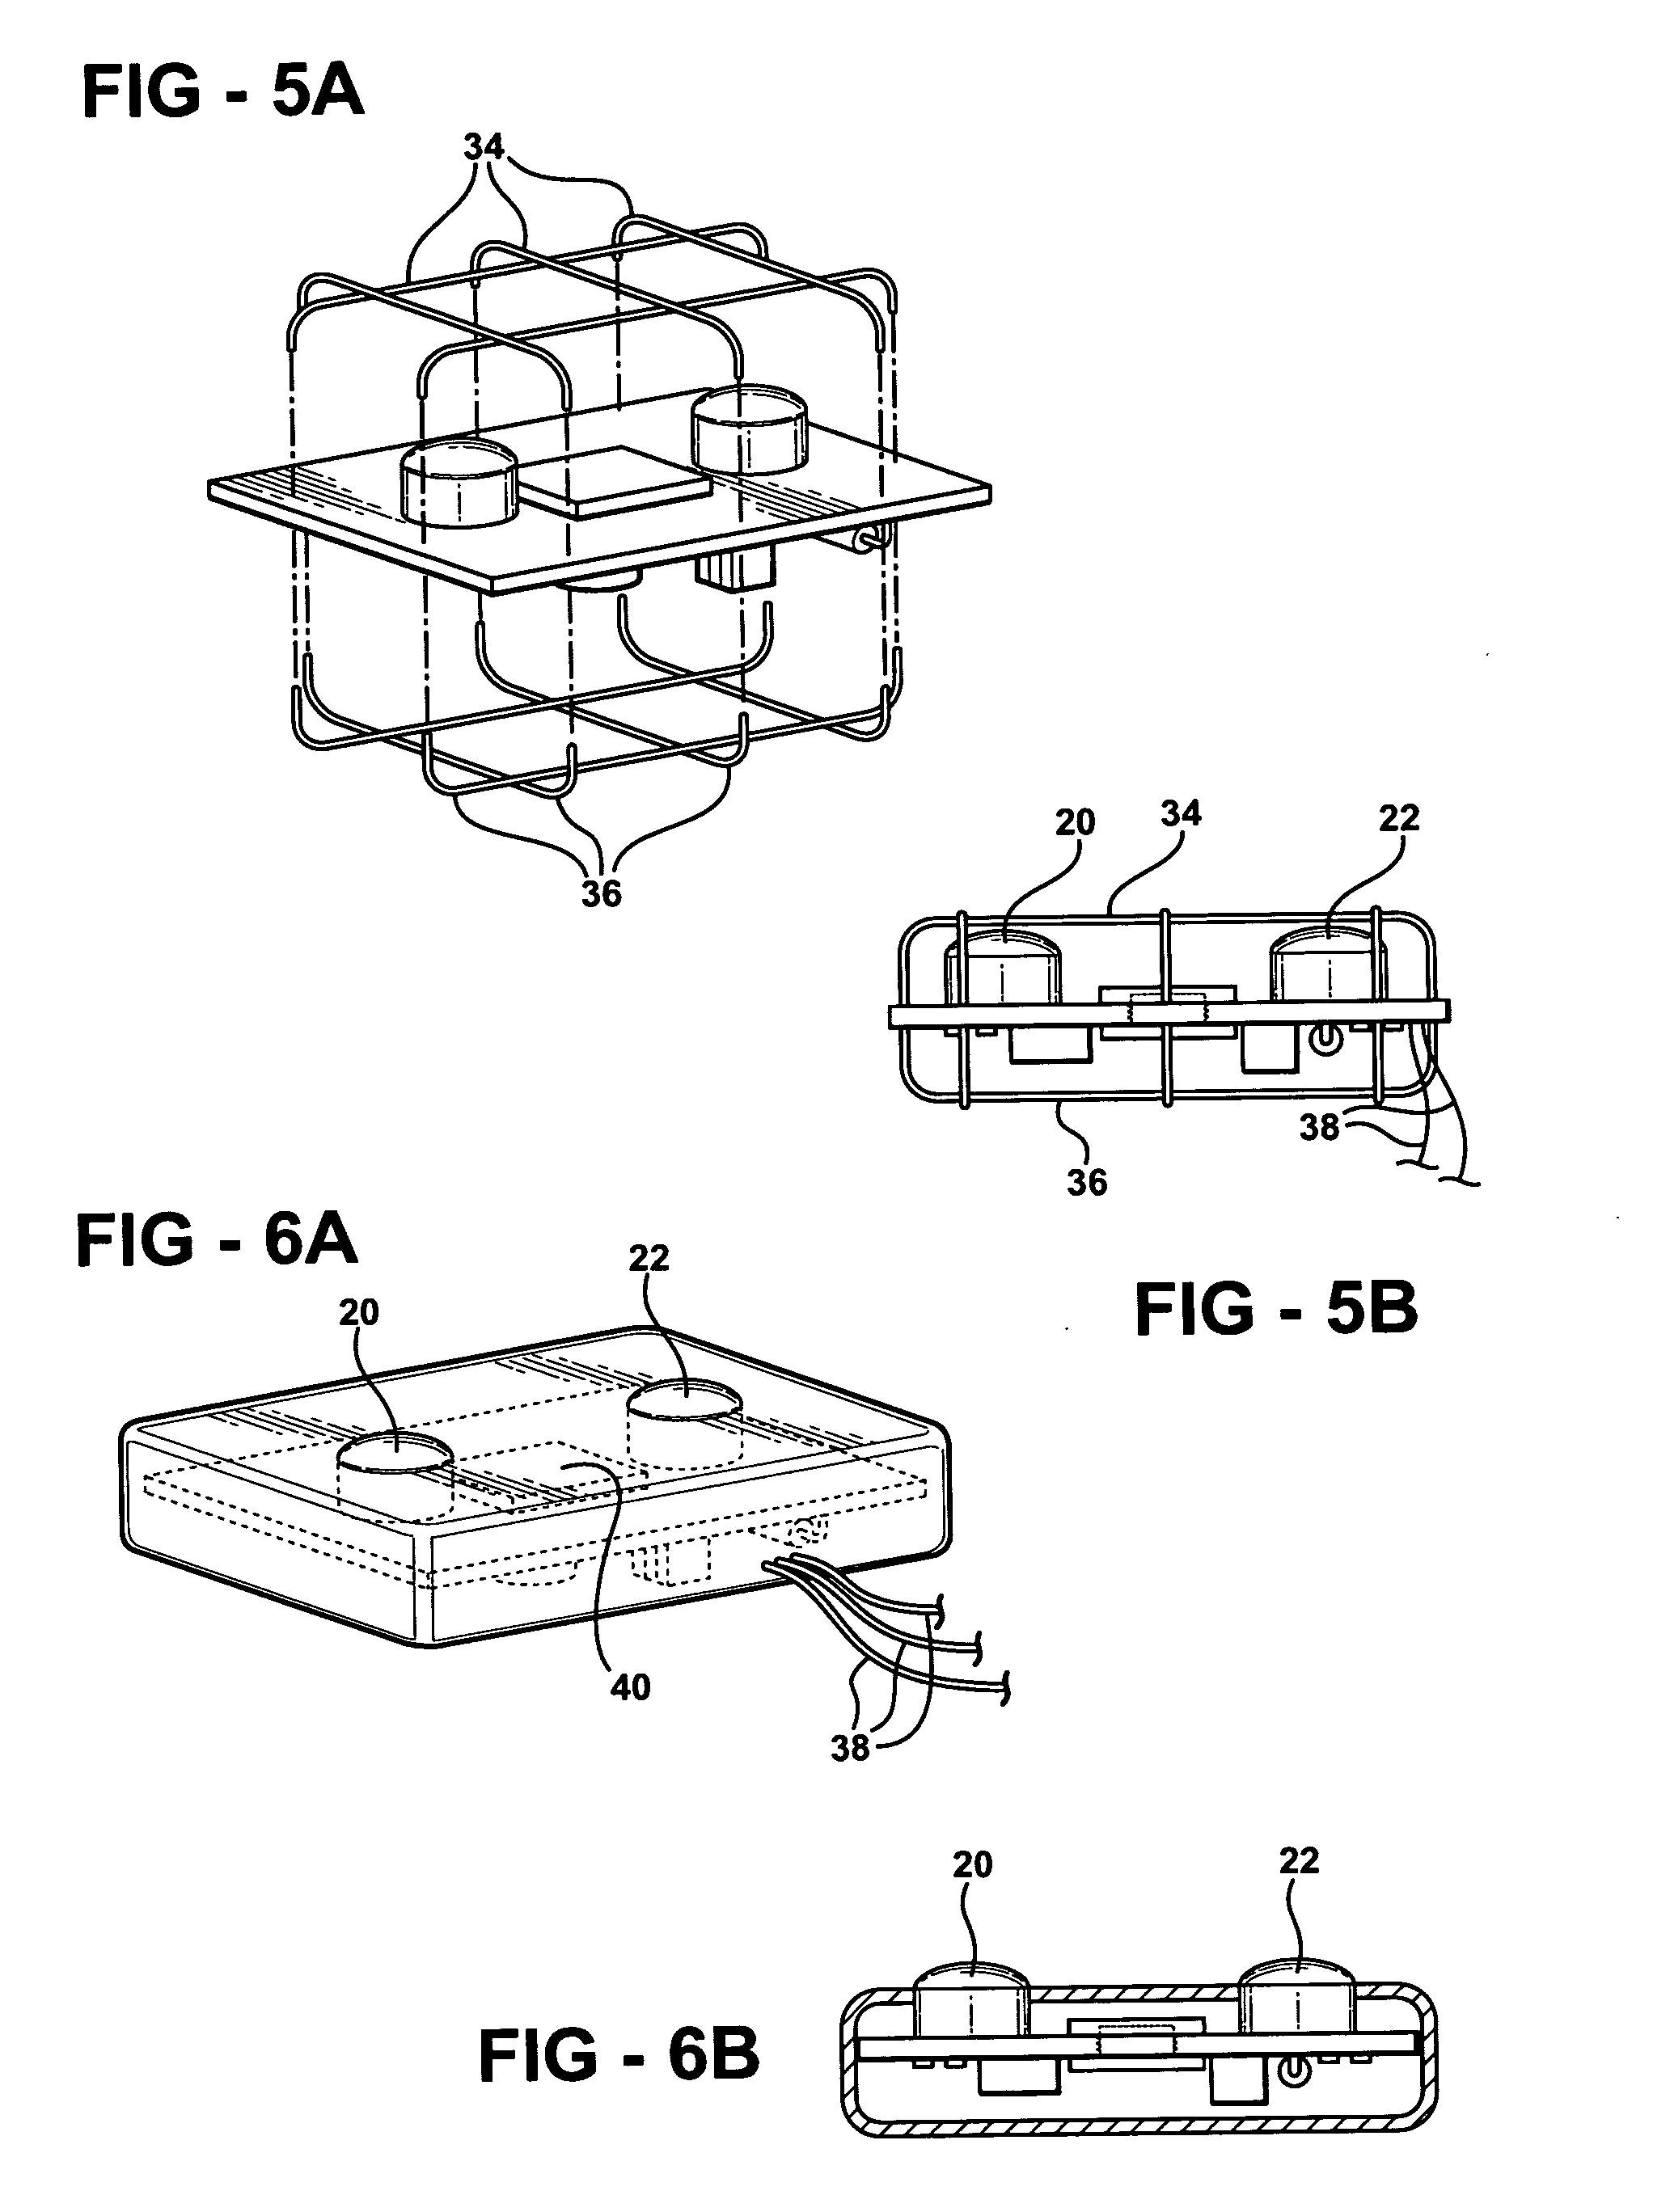 PCB board incorporating thermo-encapsulant for providing controlled heat dissipation and electromagnetic functions and associated method of manufacturing a PCB board